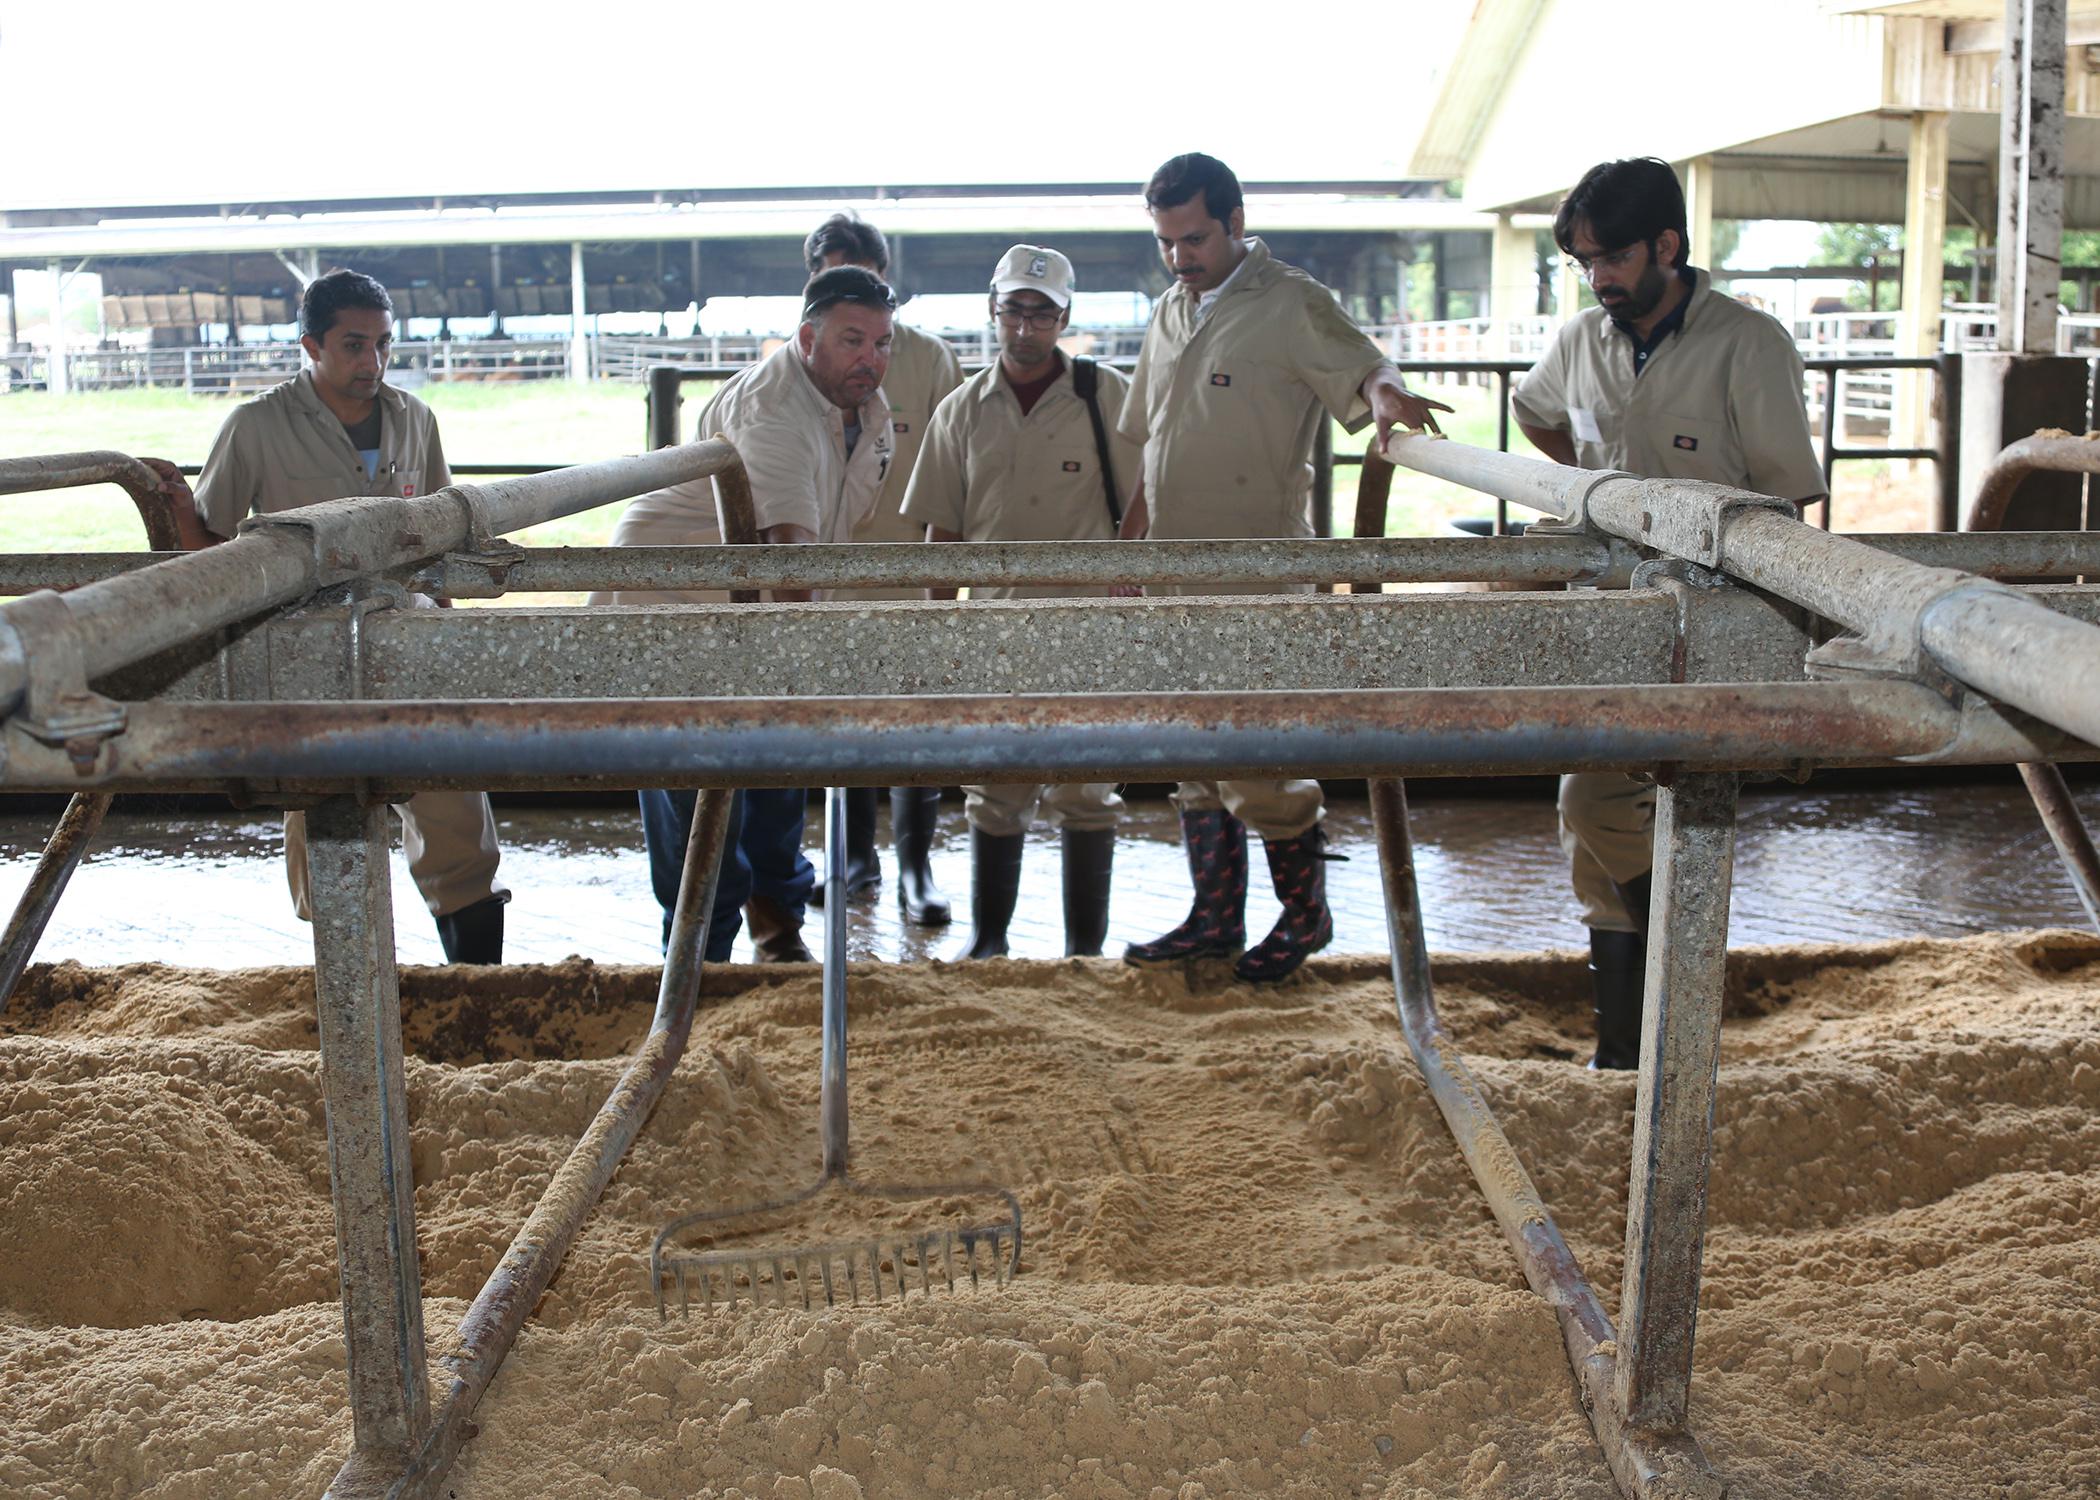 Agricultural professionals from Pakistan look on during a visit to Mississippi State University as dairy herder Kenneth Graves rakes sand at the Joe Bearden Dairy Research Center on Aug. 10, 2015. Similar groups from Bosnia-Herzegovina and Albania also visited MSU over the past month to enhance their skills in agriculture. (Photo by MSU Ag Communications/Kat Lawrence)